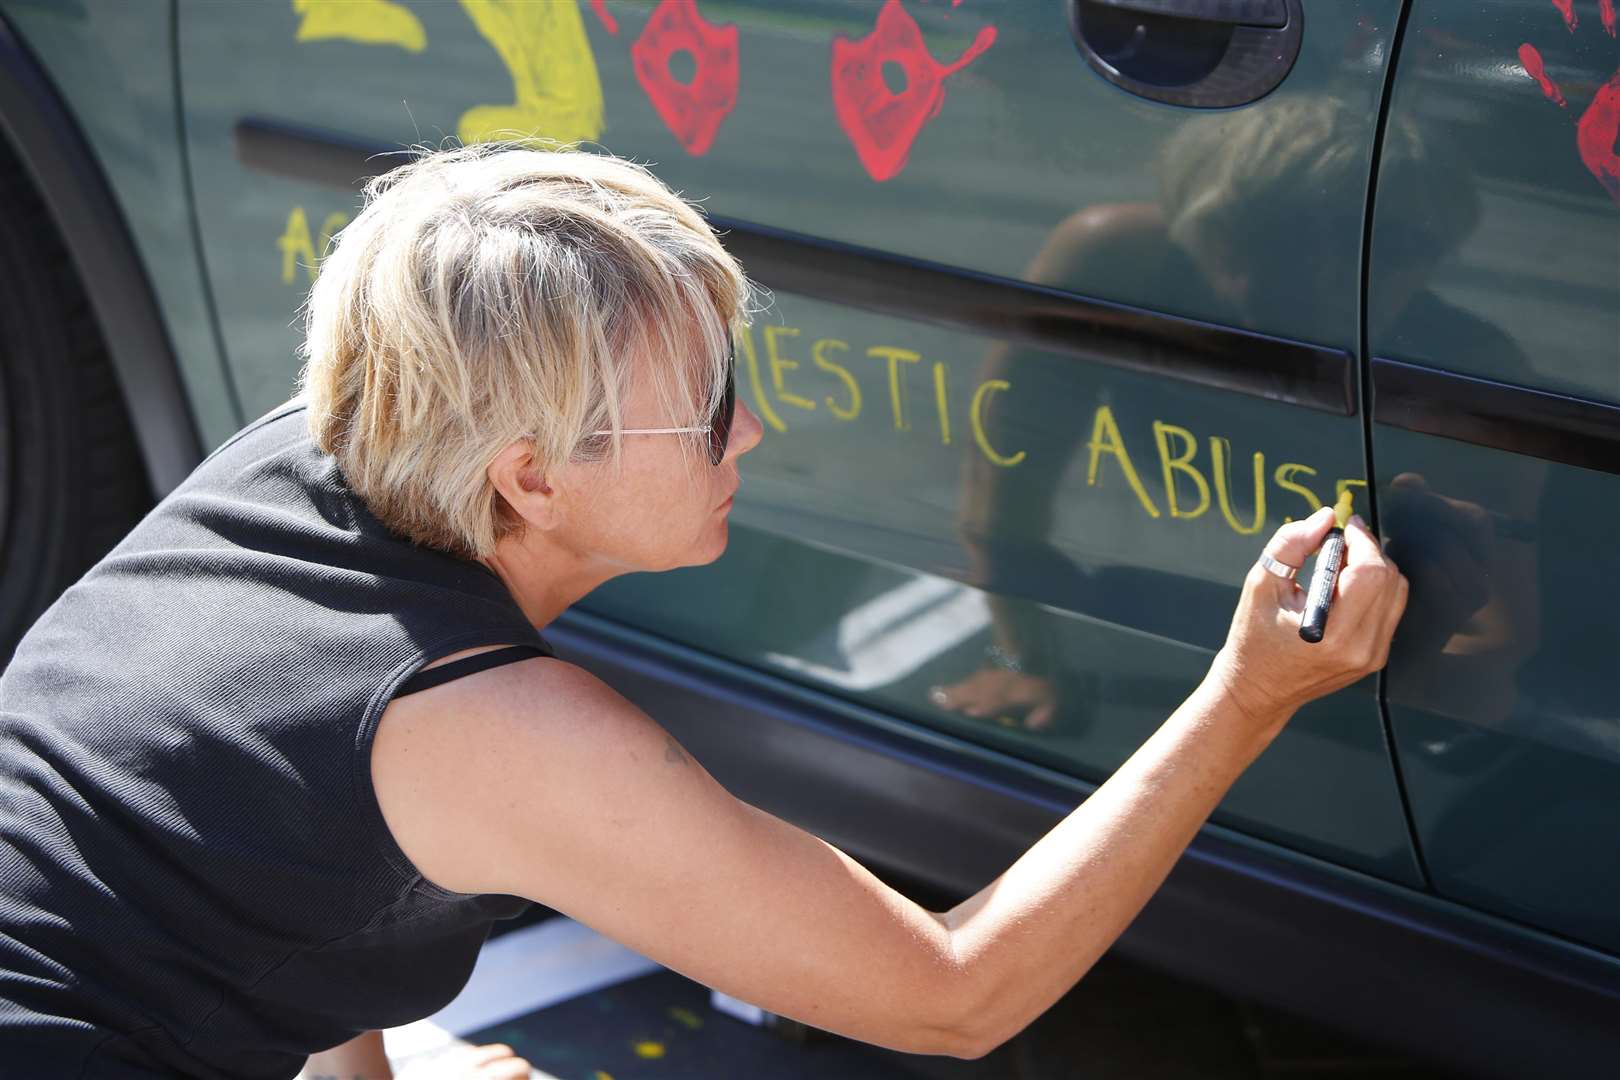 Bobby invites people to paint on his car.